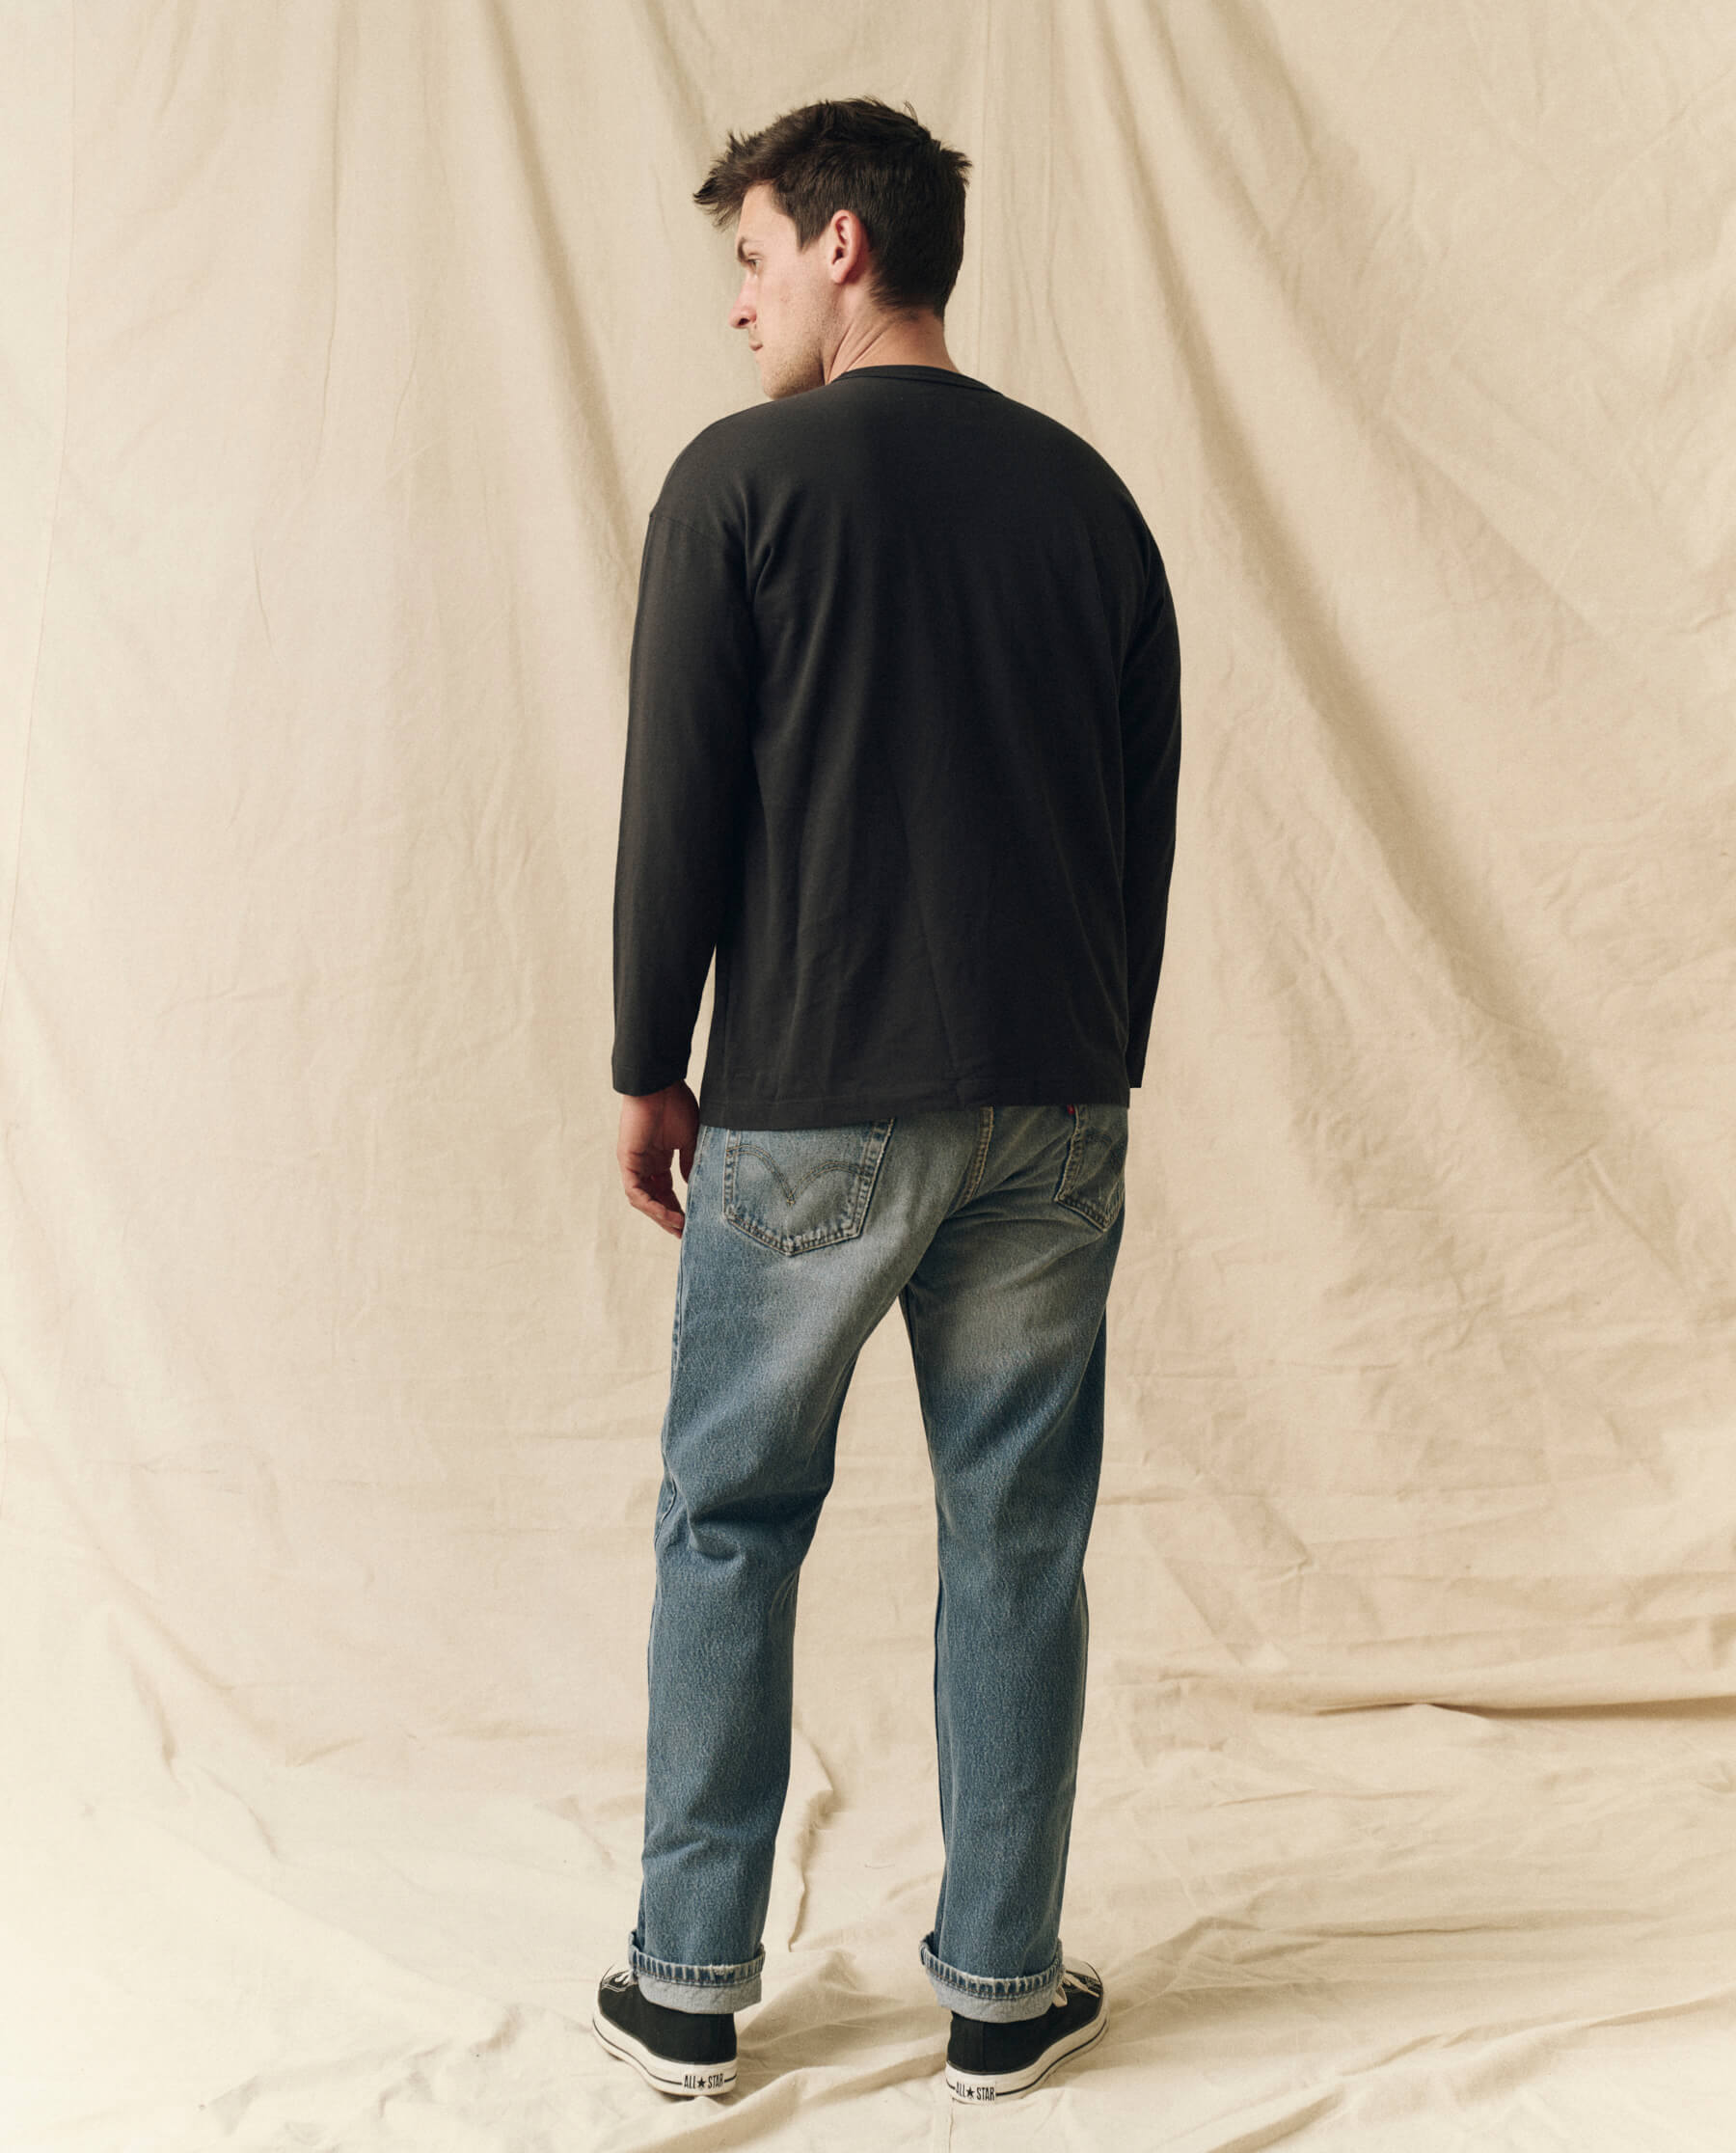 The Men's Pure Knits Long Sleeve Boxy Crew. Solid -- Almost Black TEES THE GREAT. FALL 23 MEN